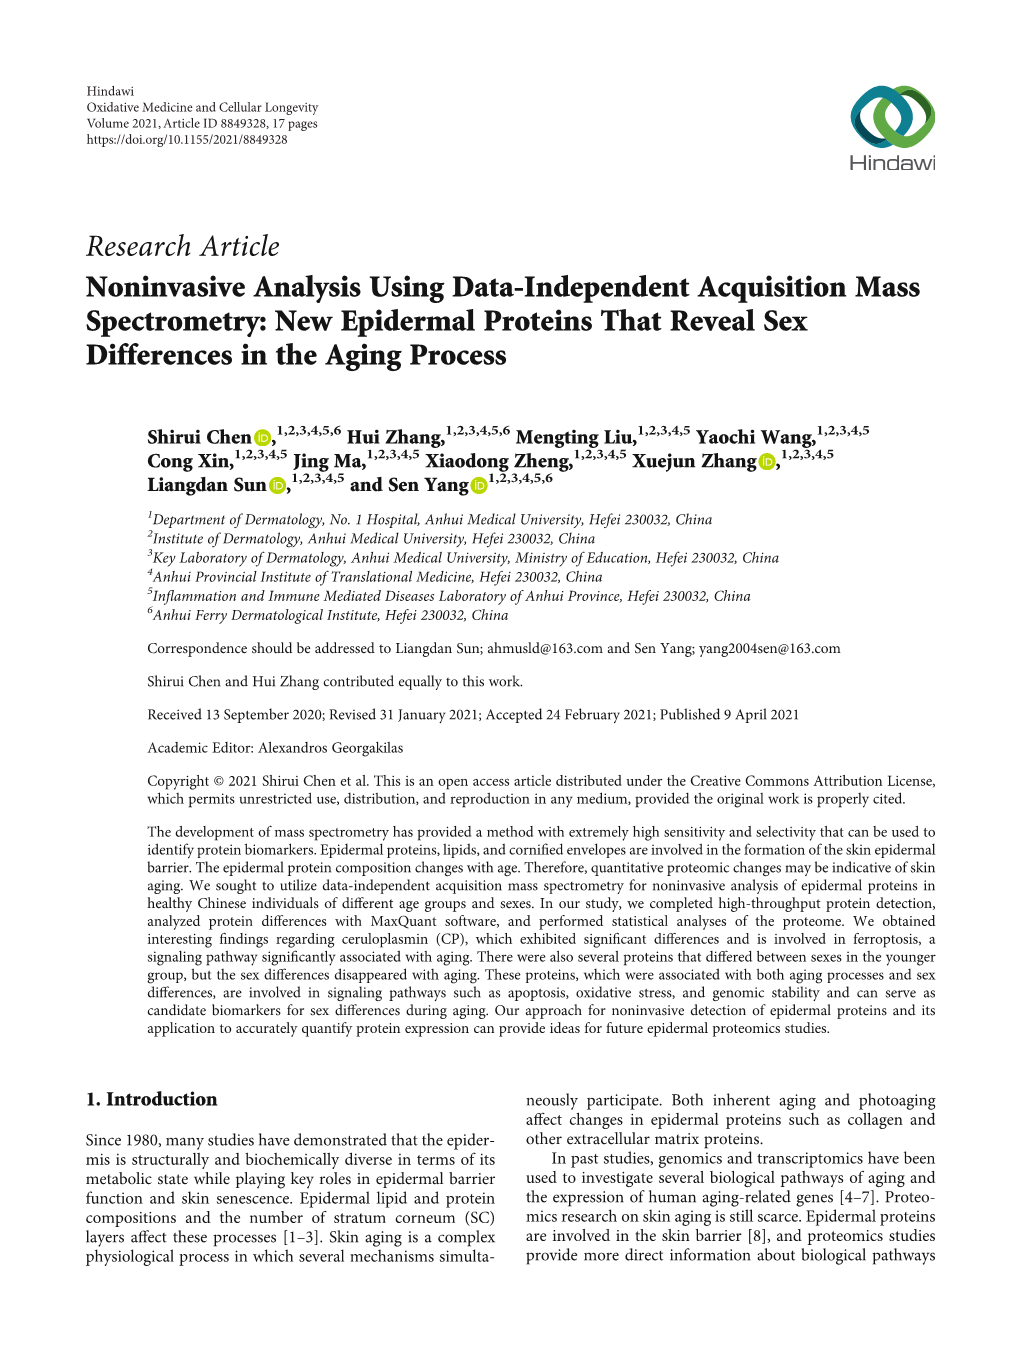 Noninvasive Analysis Using Data-Independent Acquisition Mass Spectrometry: New Epidermal Proteins That Reveal Sex Differences in the Aging Process